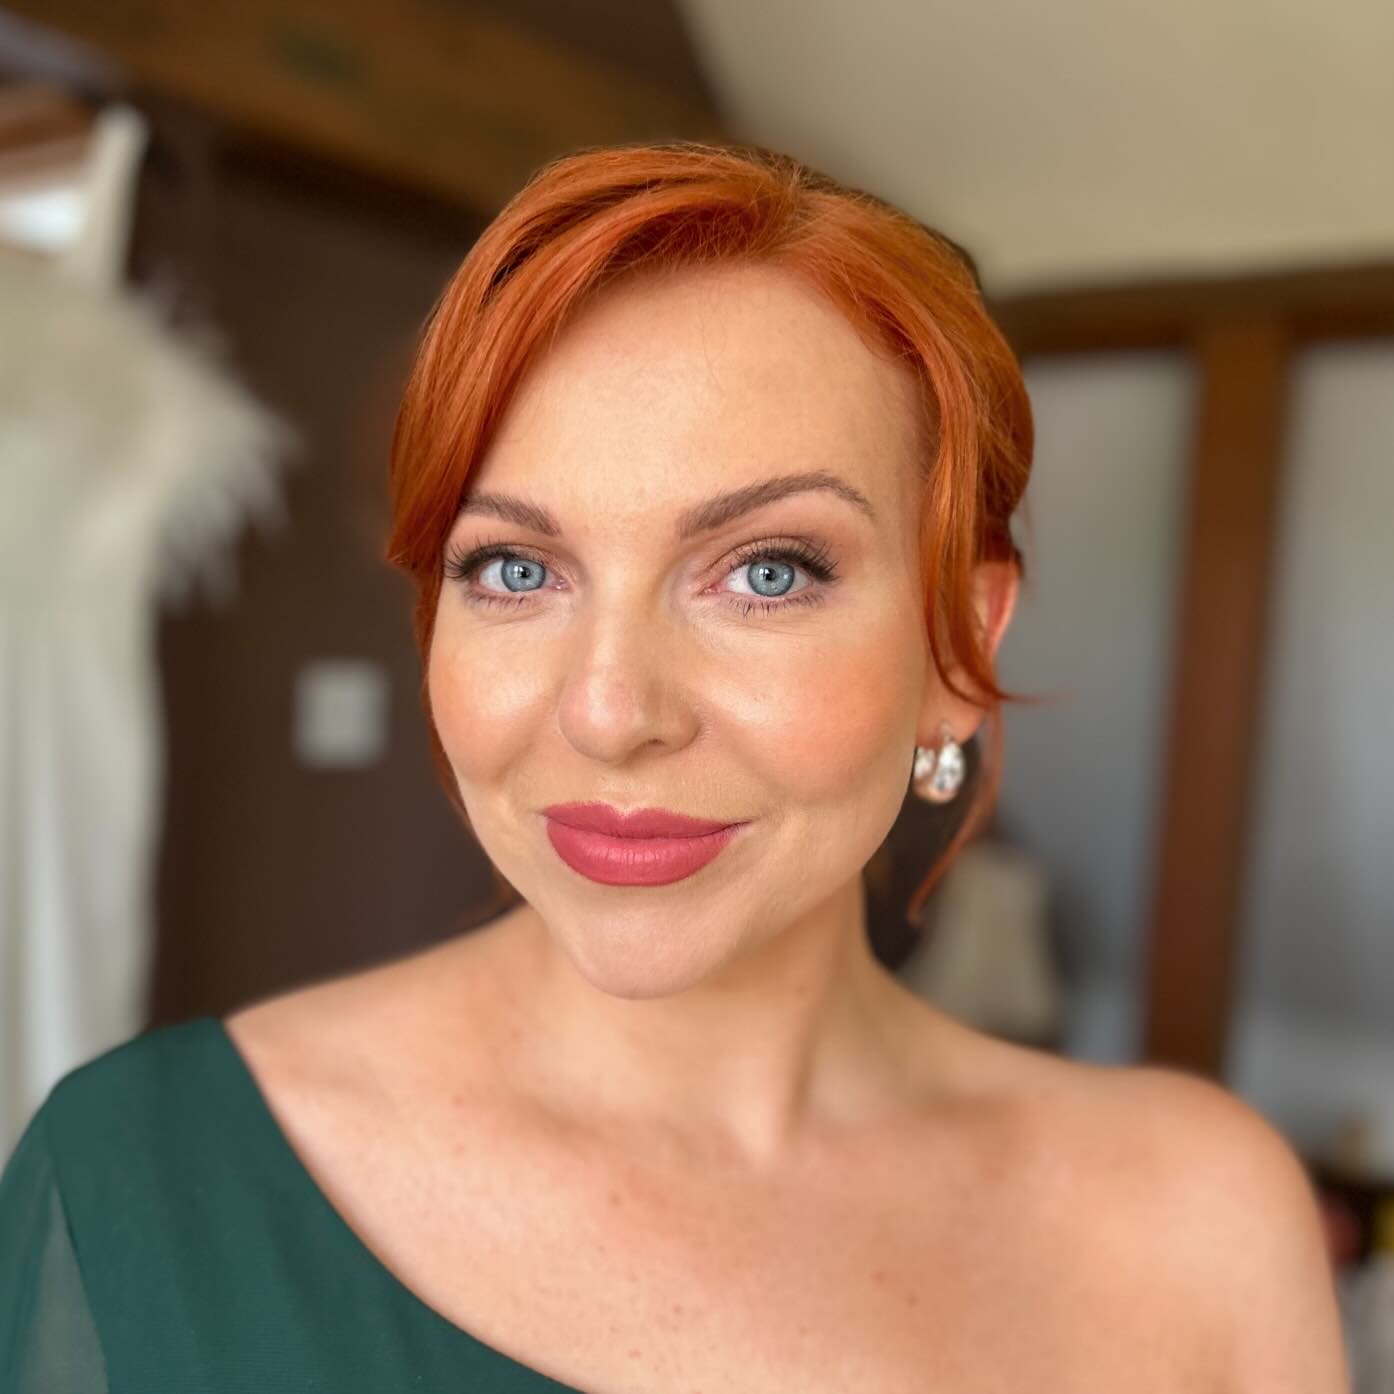 I am literally pinching myself today that I got to hang out with one of my most favs @occasionhairbymegan and paint the faces of some truly gorgeous (inside and out!) bridesmaids. 

I mean if Carlsberg made bridesmaids then the beautiful  @reastham w